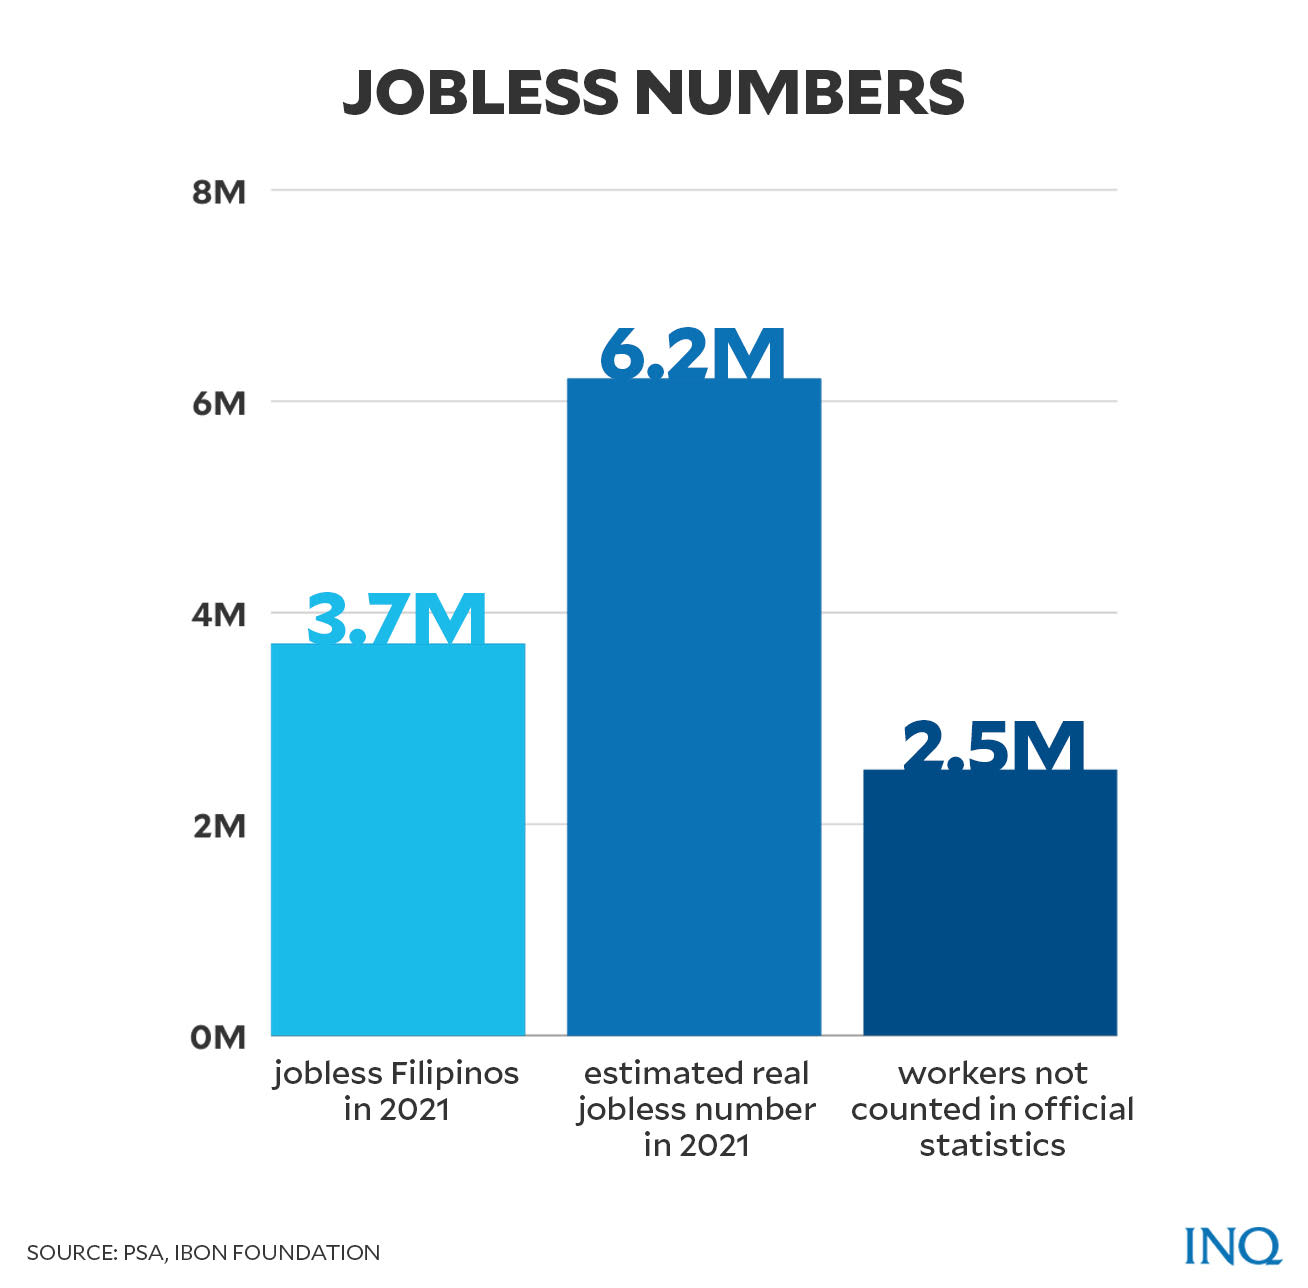 Jobless numbers